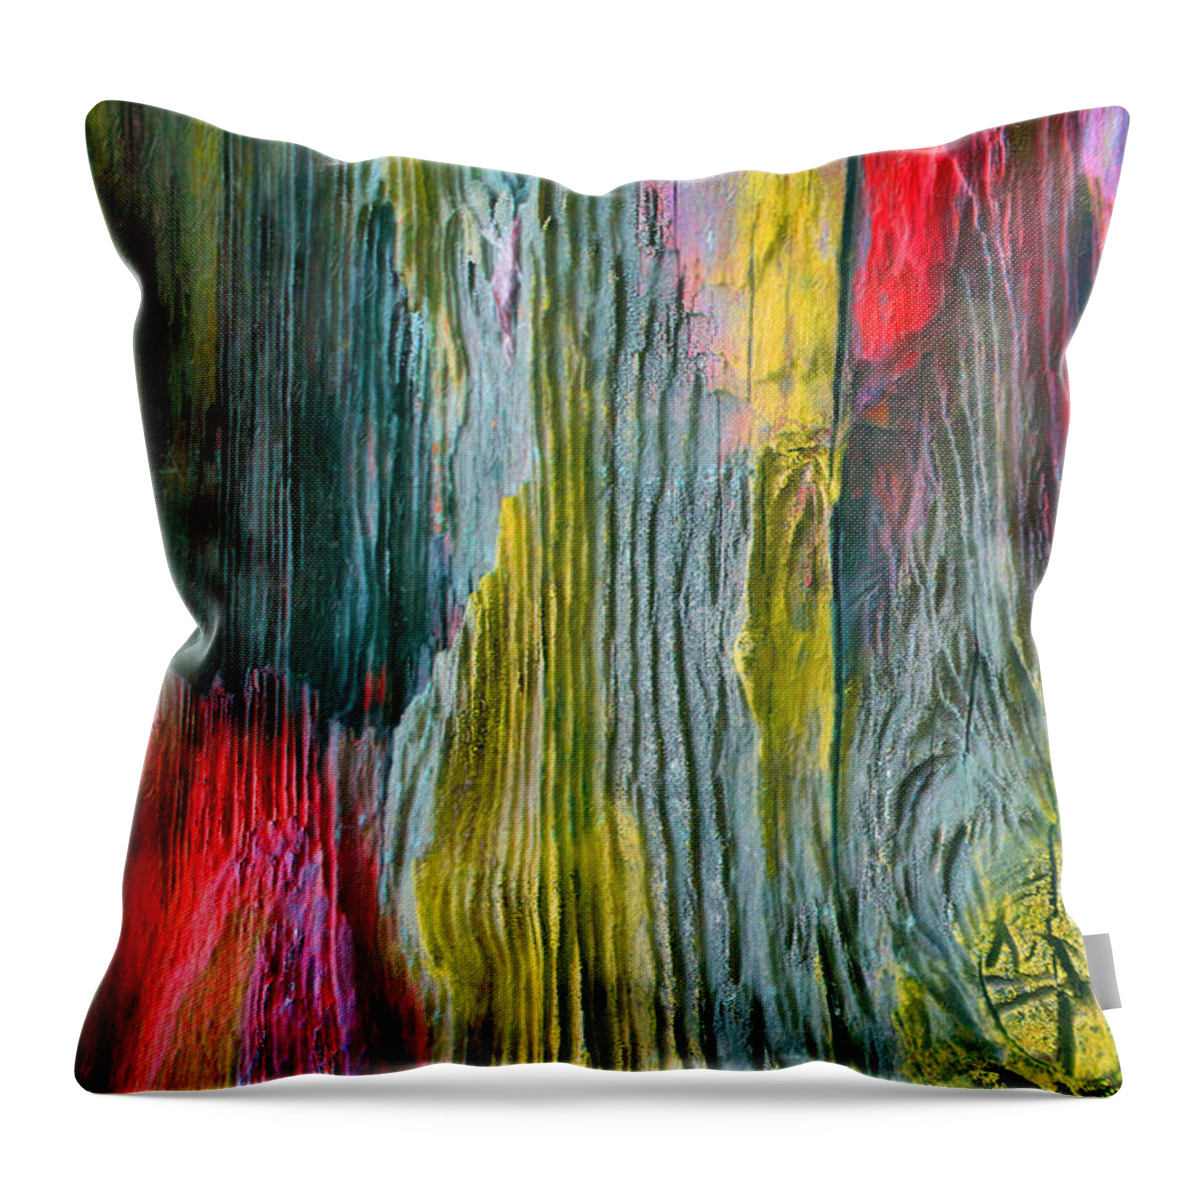 'inconsequential Beauty' Collection By Serge Averbukh Throw Pillow featuring the digital art Nature's Secret Code - The Wood Grain Message #5 by Serge Averbukh